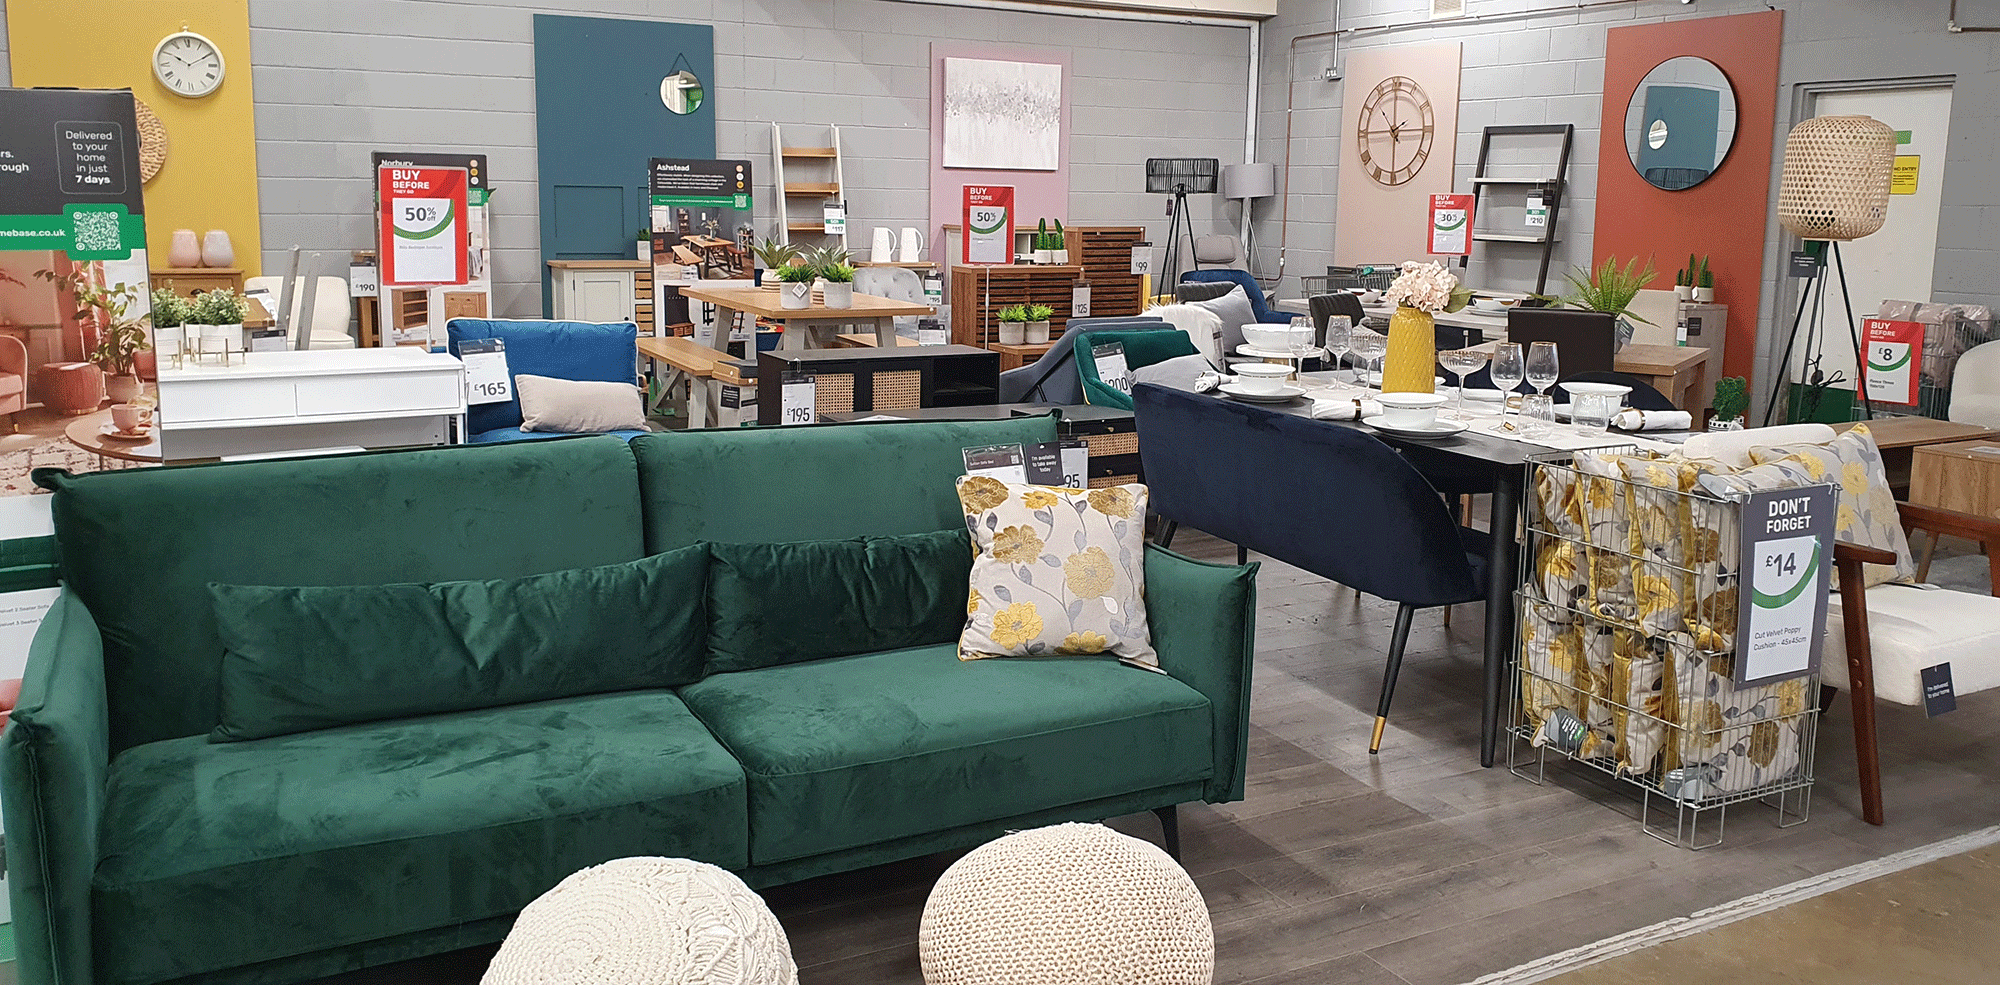 Visit out furniture showroom for the latest in trends & ideas Homebase - Northampton Northampton 03456 407102